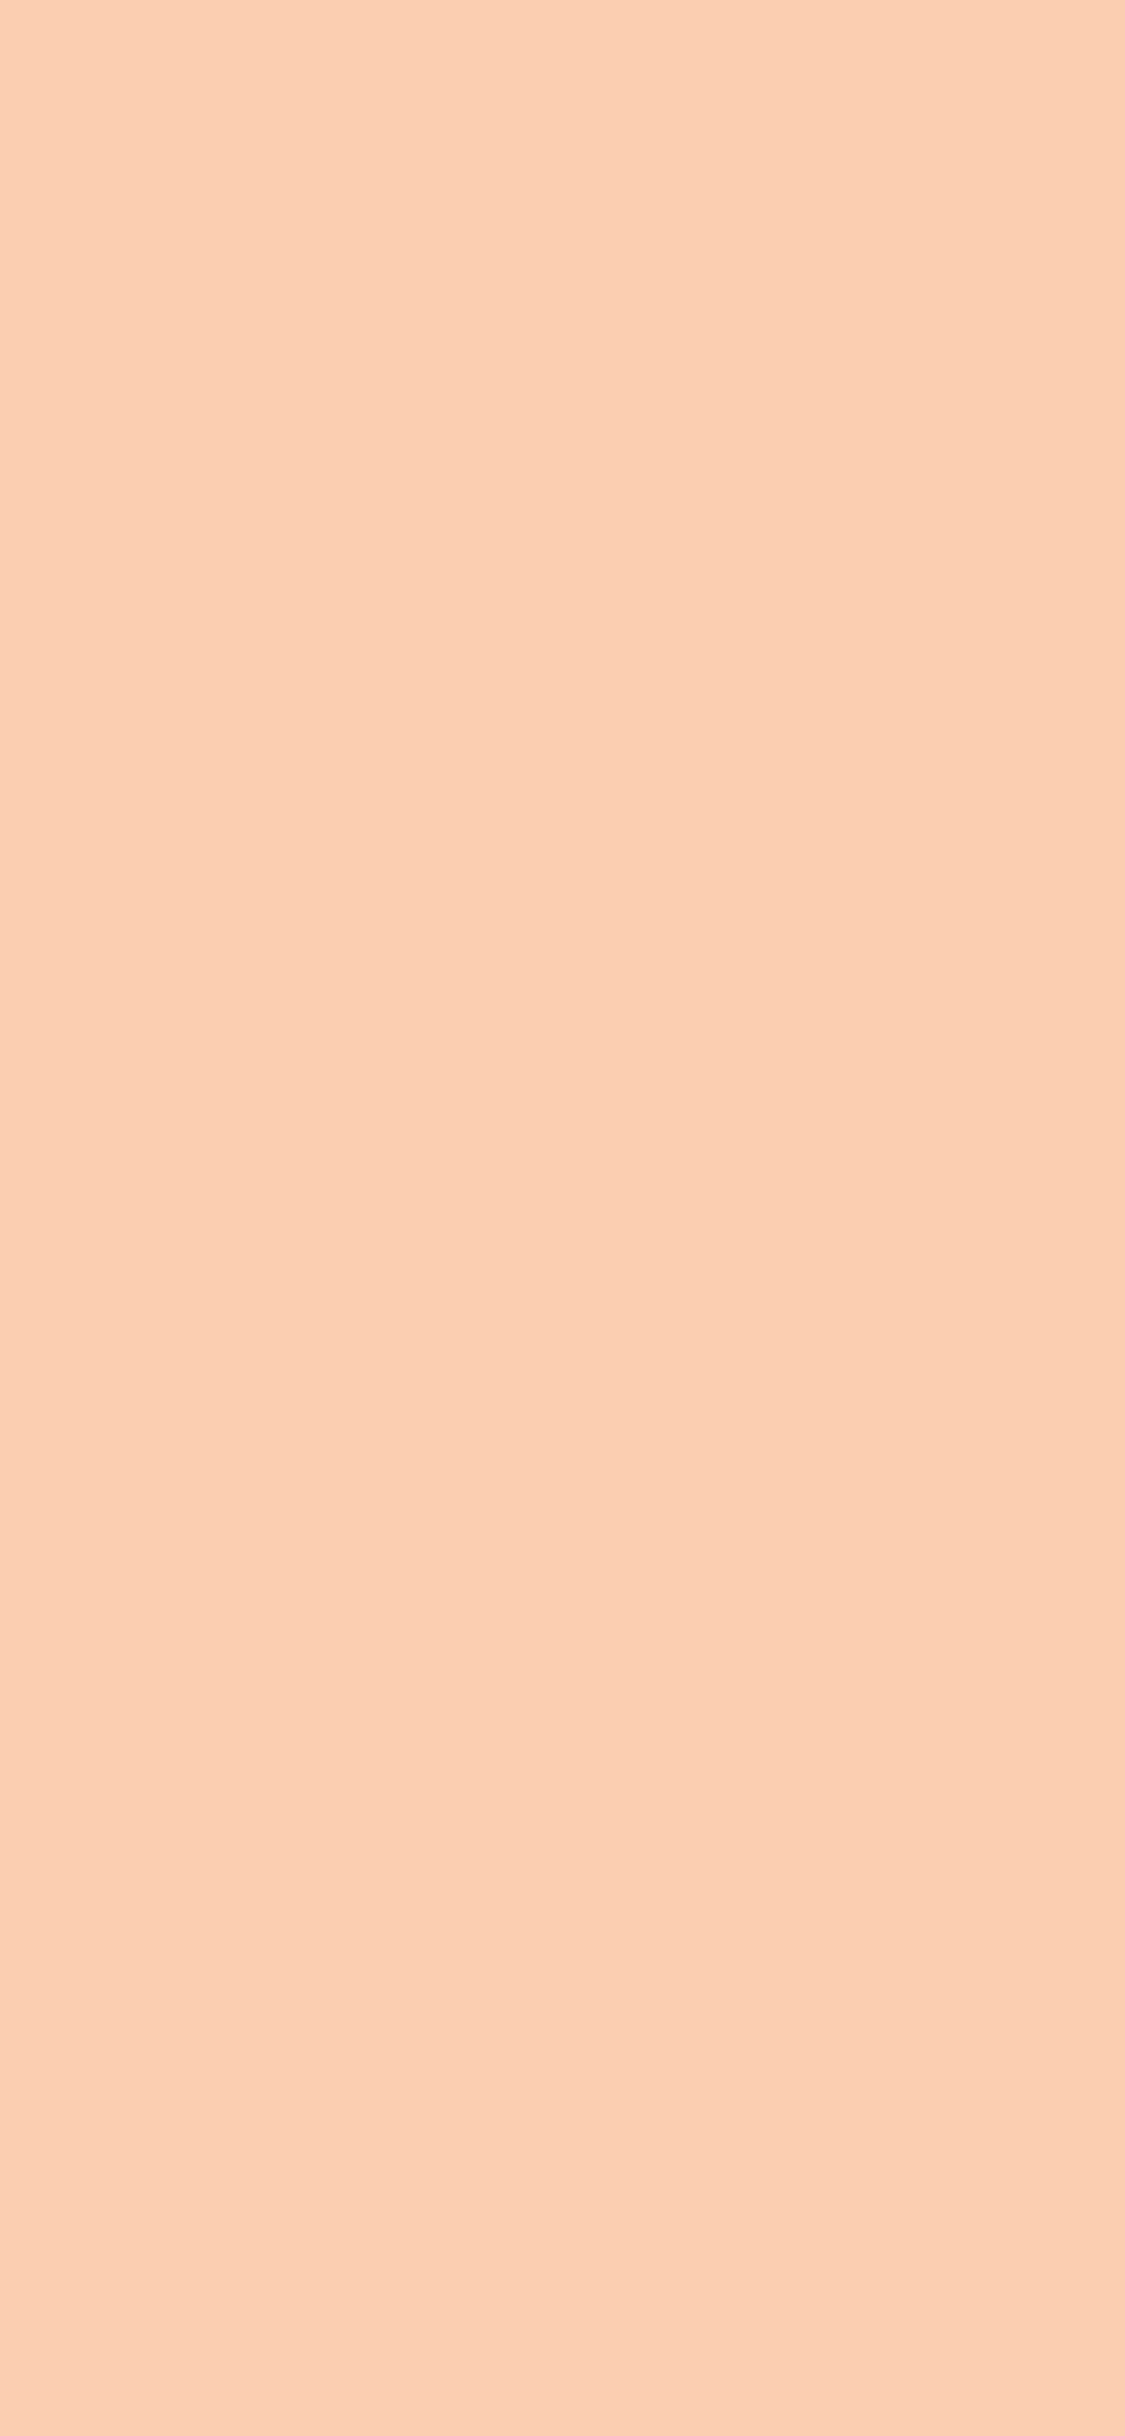 1125x2436 Apricot Solid Color Background